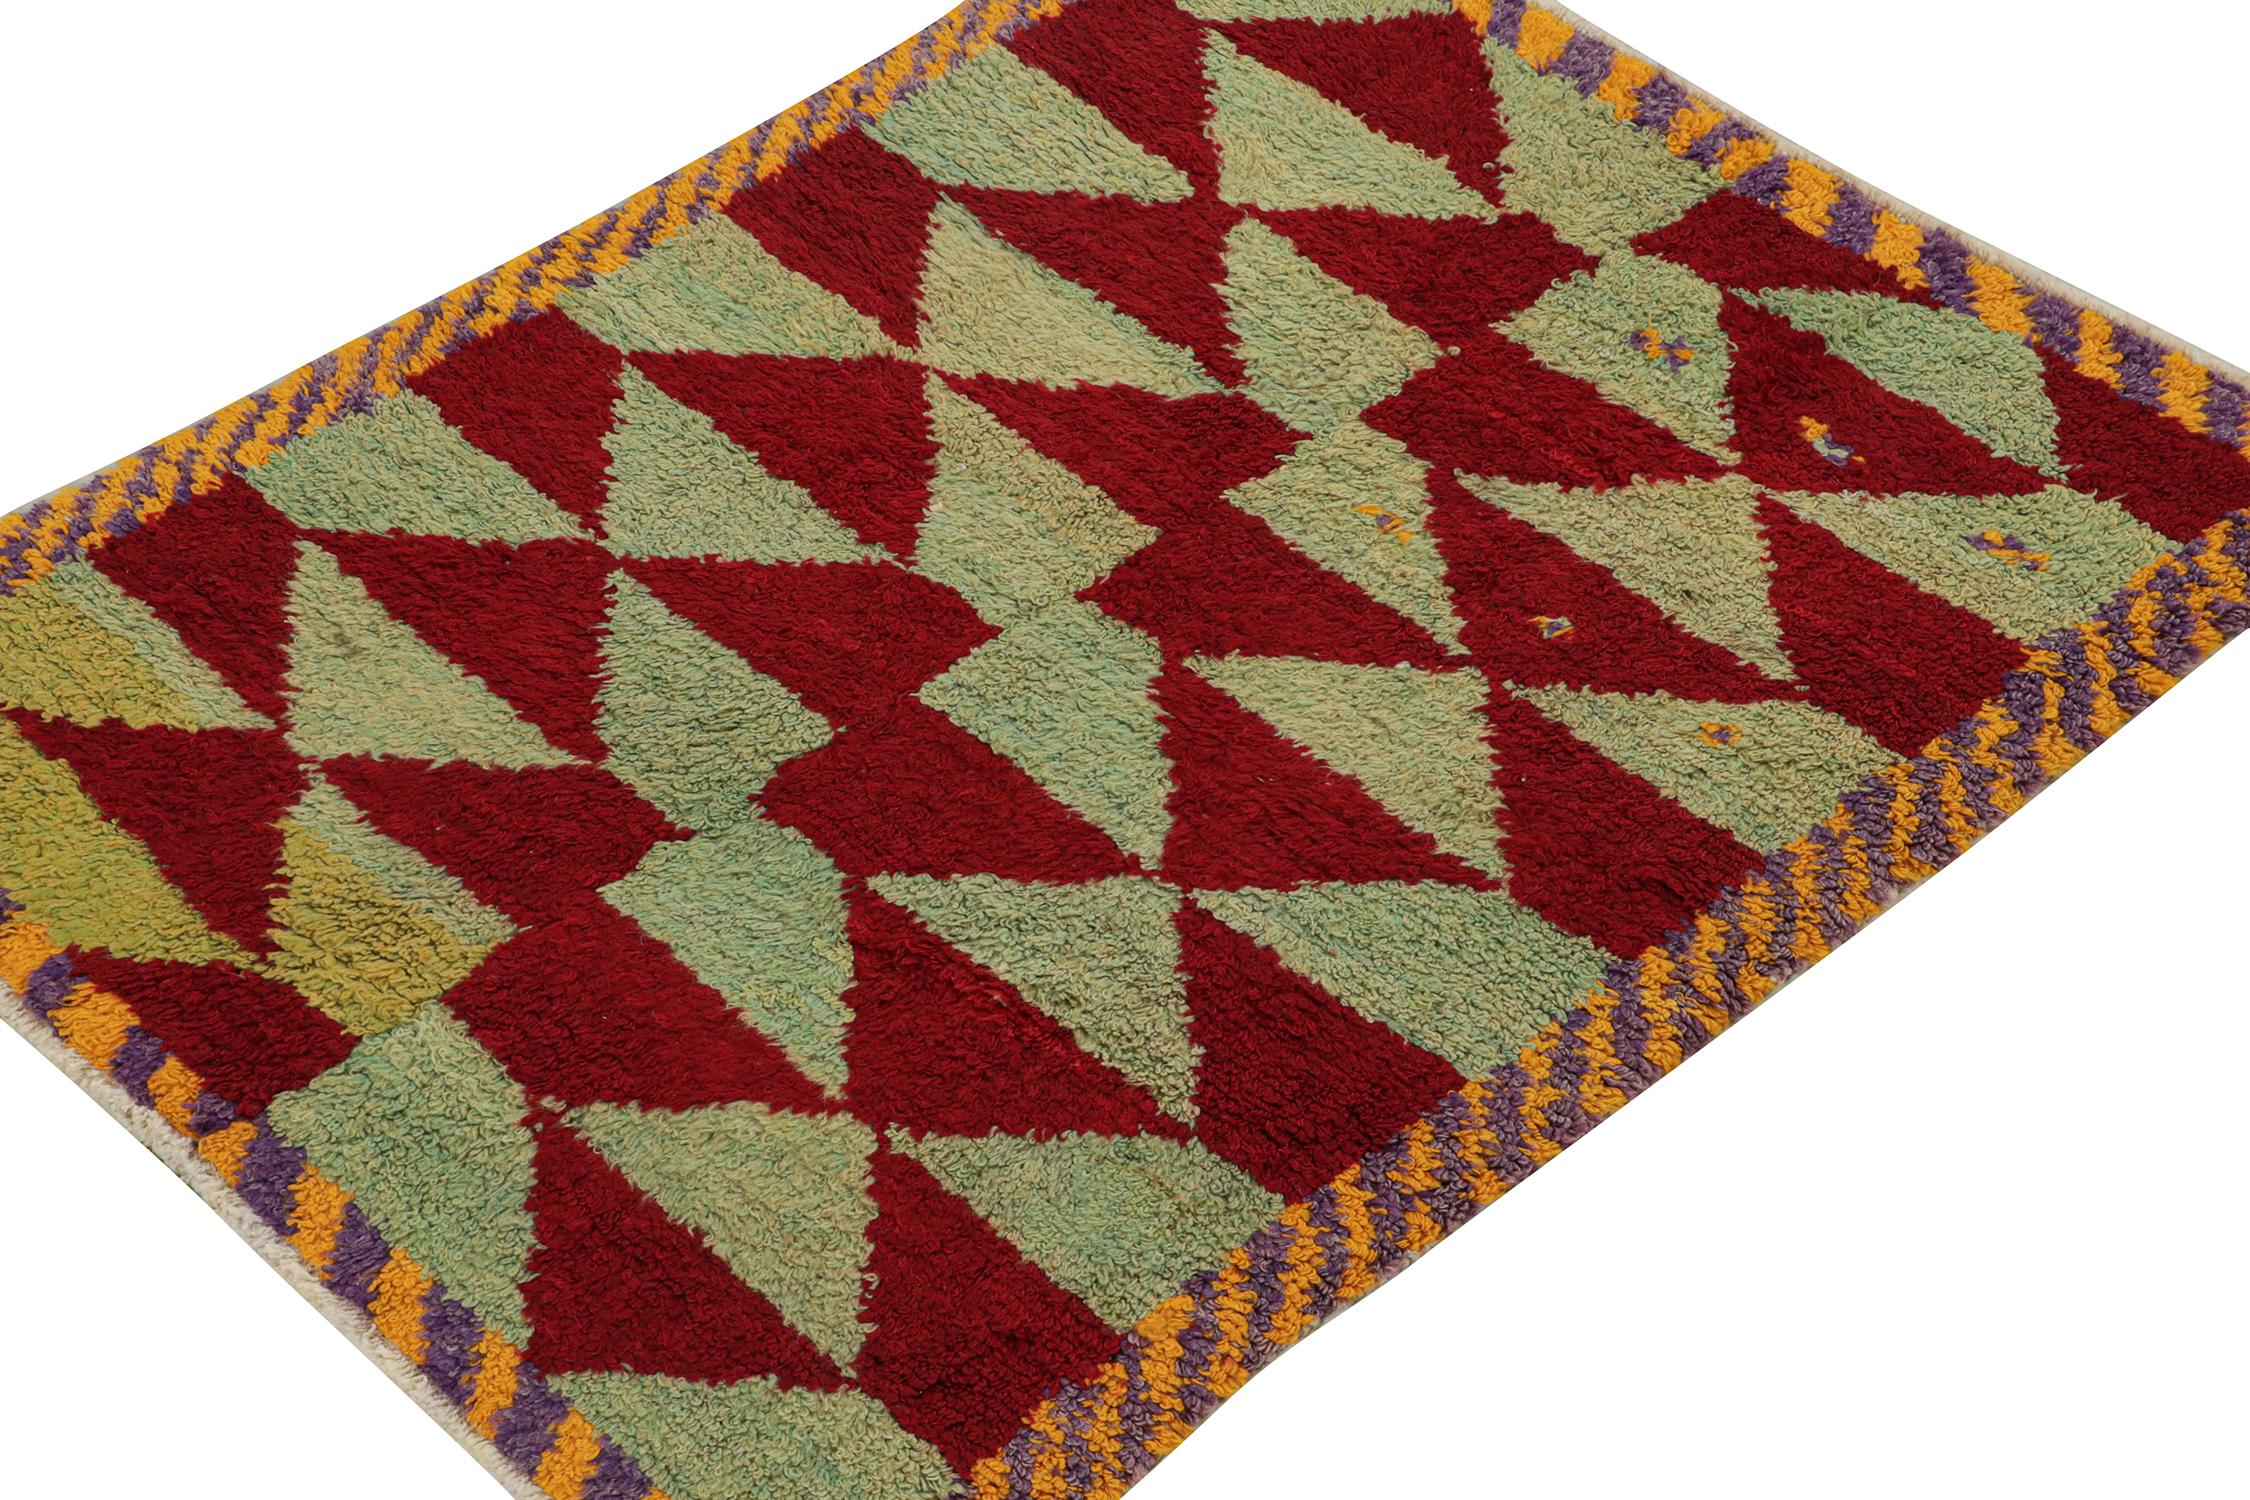 This vintage 4x5 Tulu rug is from the latest entries in Rug & Kilim’s mid-century tribal curations. Hand-knotted in wool from Turkey circa 1950-1960.

Further On the Design:

This tribal provenance is one of the most livable, and collectible